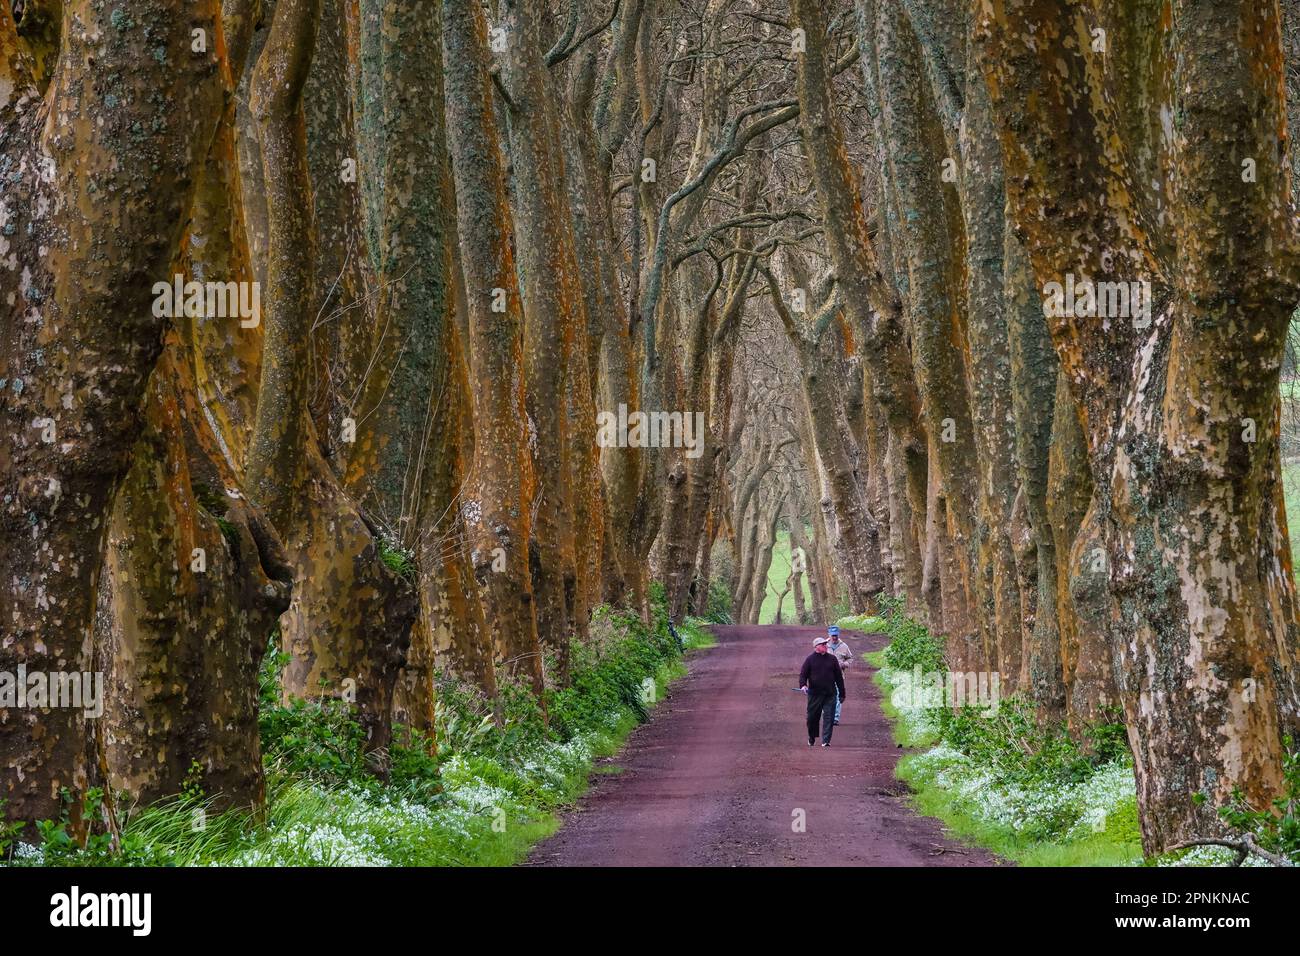 Azorean farmers walk down a dirt road between massive London Plane trees forming a tree tunnel on the Azores Island of Sao Miguel near Povoacao, Portugal. Stock Photo